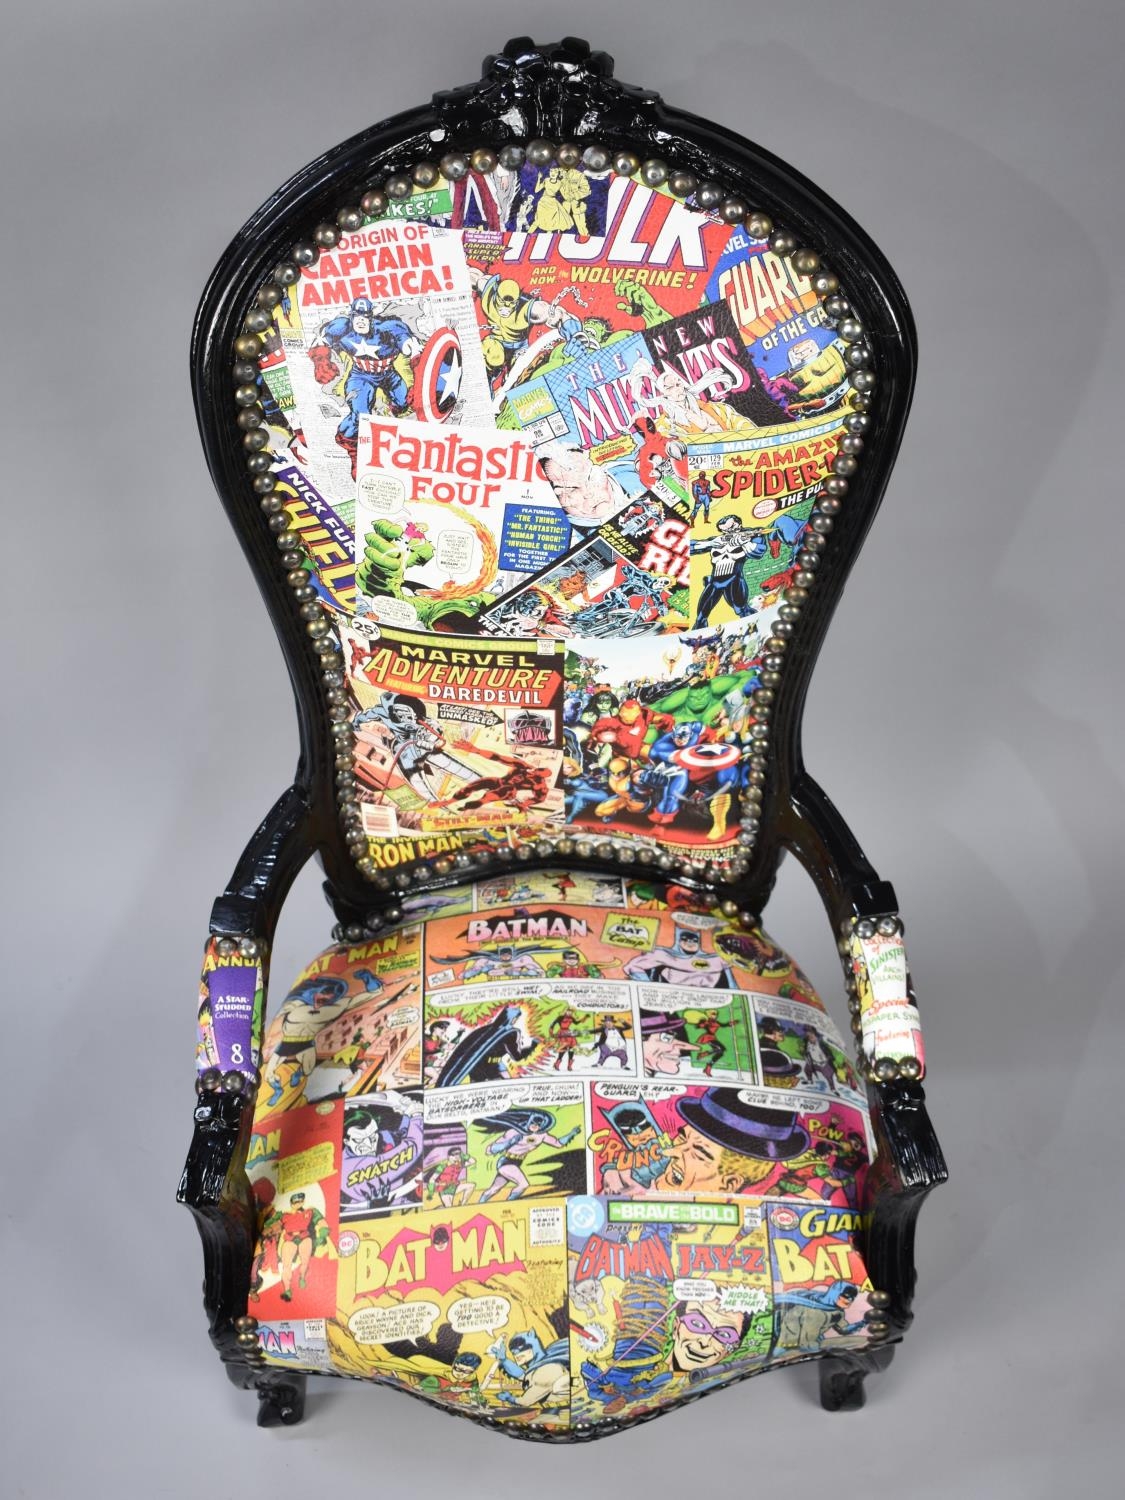 A Victorian Style Chair Upholstered in Comic Book Fabric - Image 2 of 2